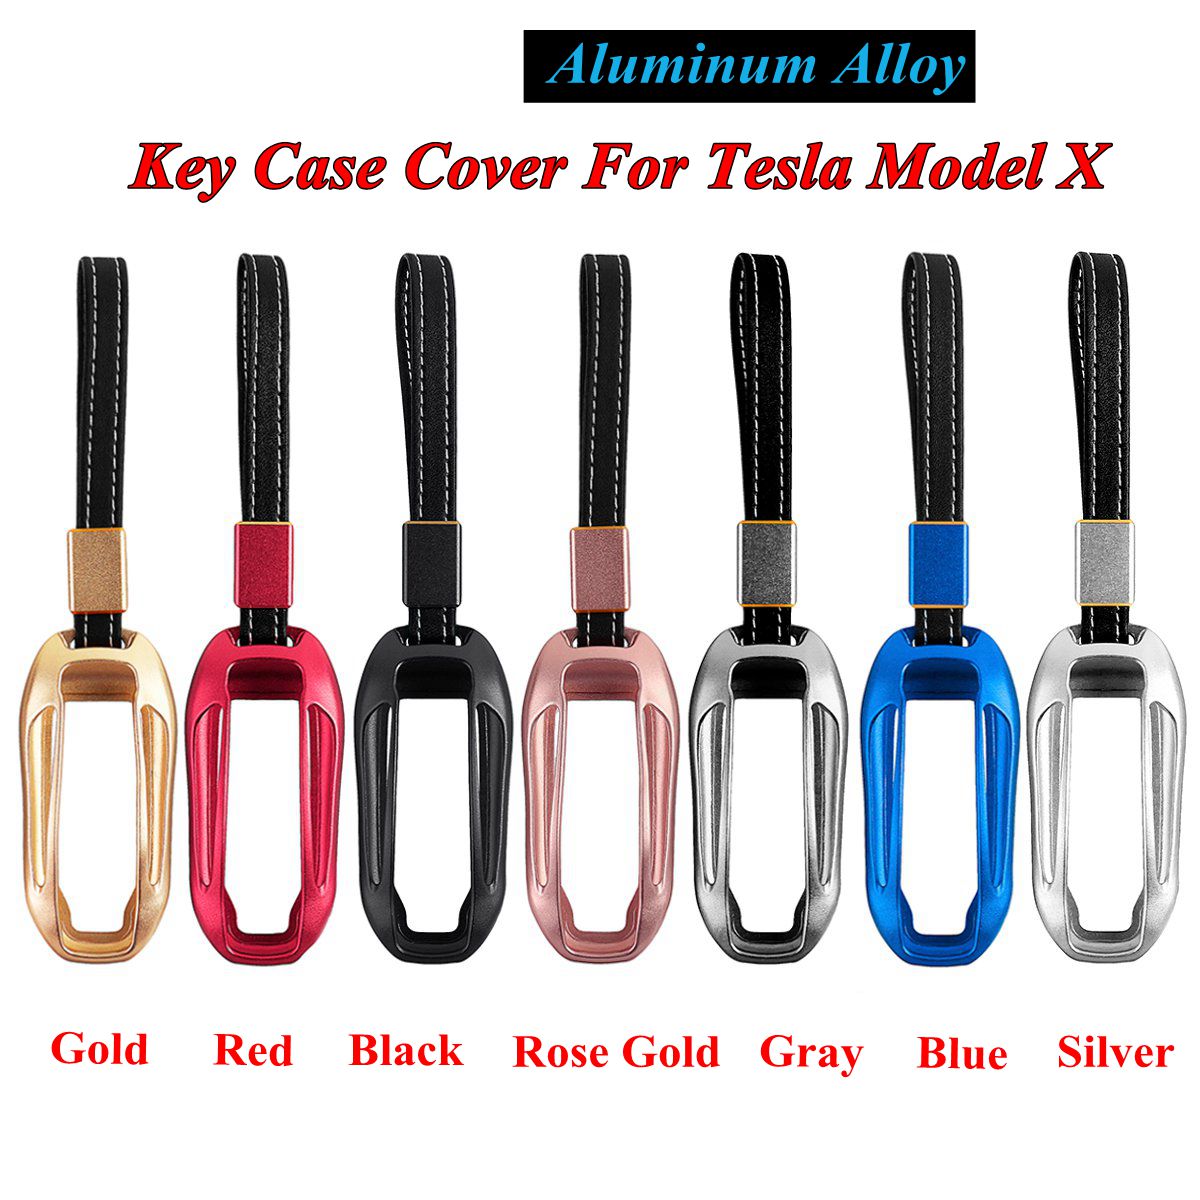 8-Colors-Aluminum-Alloy-Remote-Key-Cover-Fob-Case-Shell-w-Keychain-Fits-For-Tesla-Model-X-1399687-1